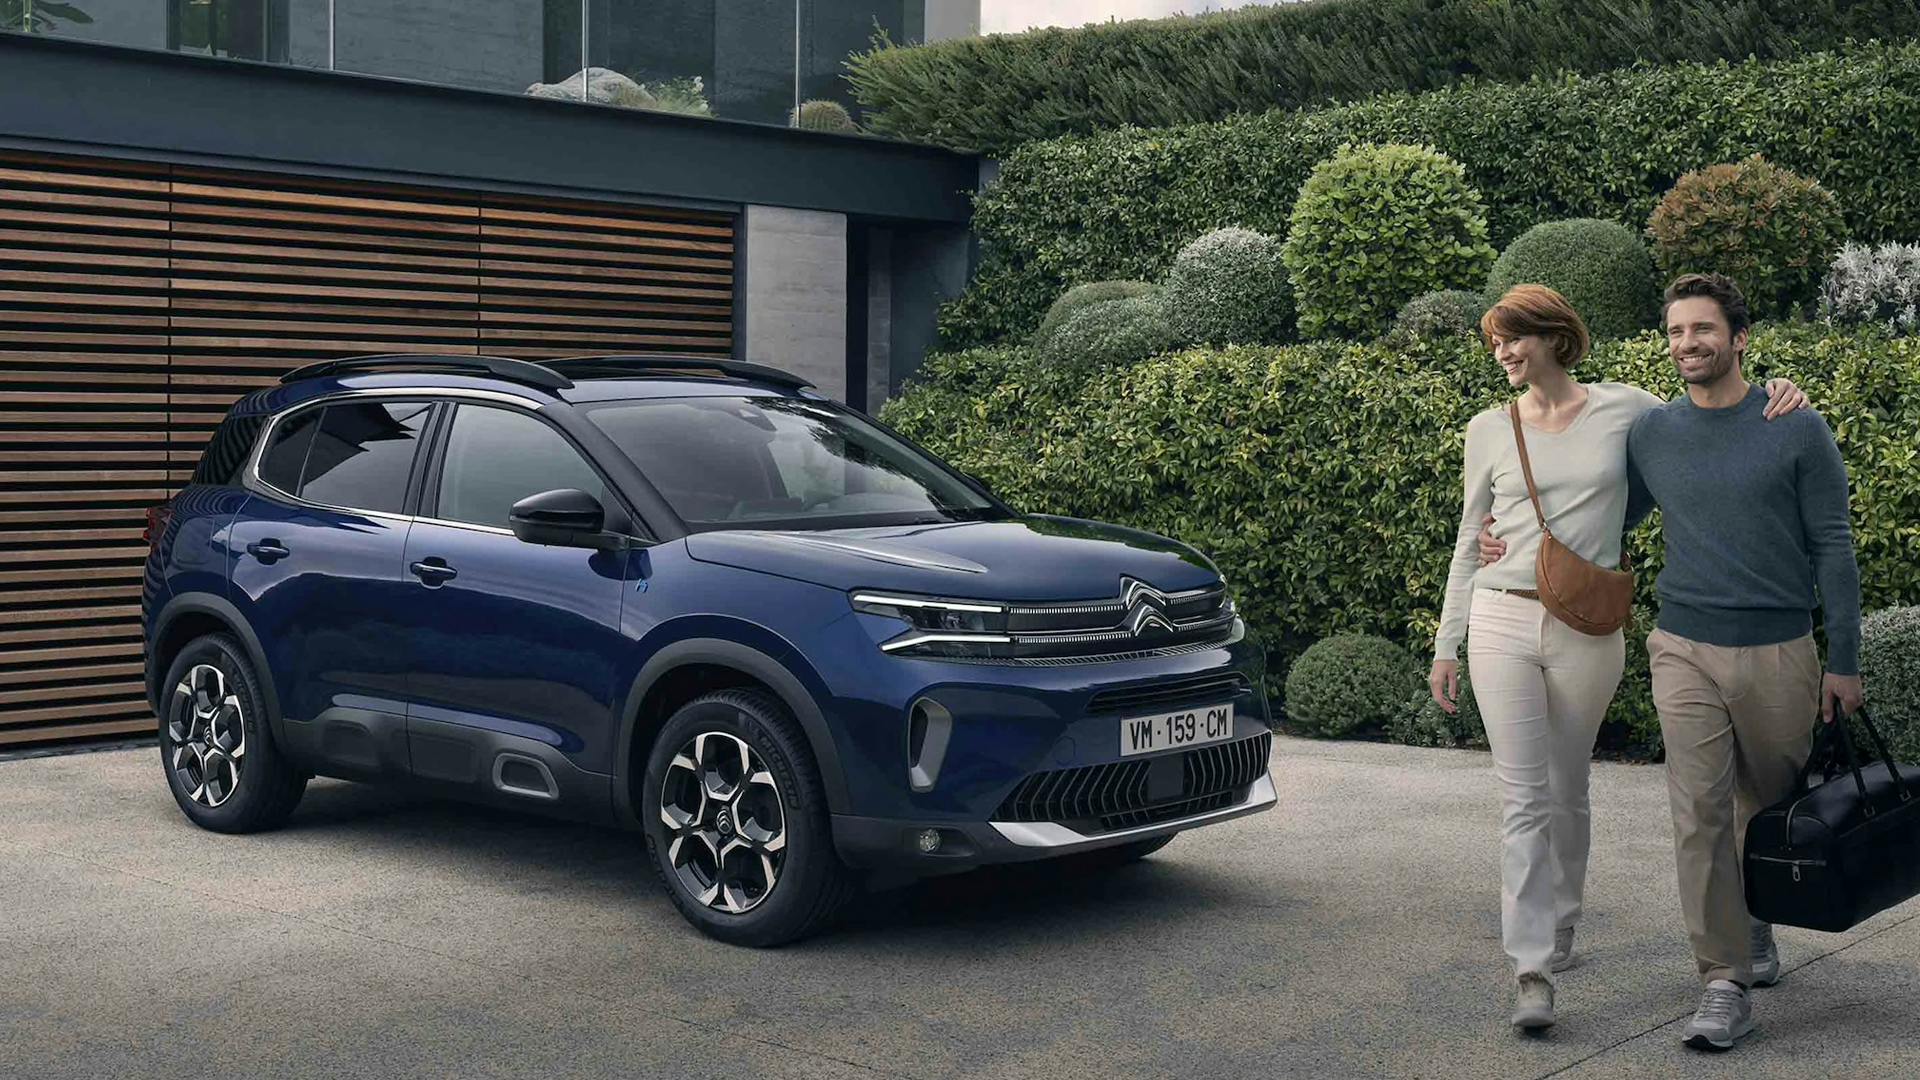 New Citroën C5 Aircross Plug-In Hybrid, the ultimate experience of